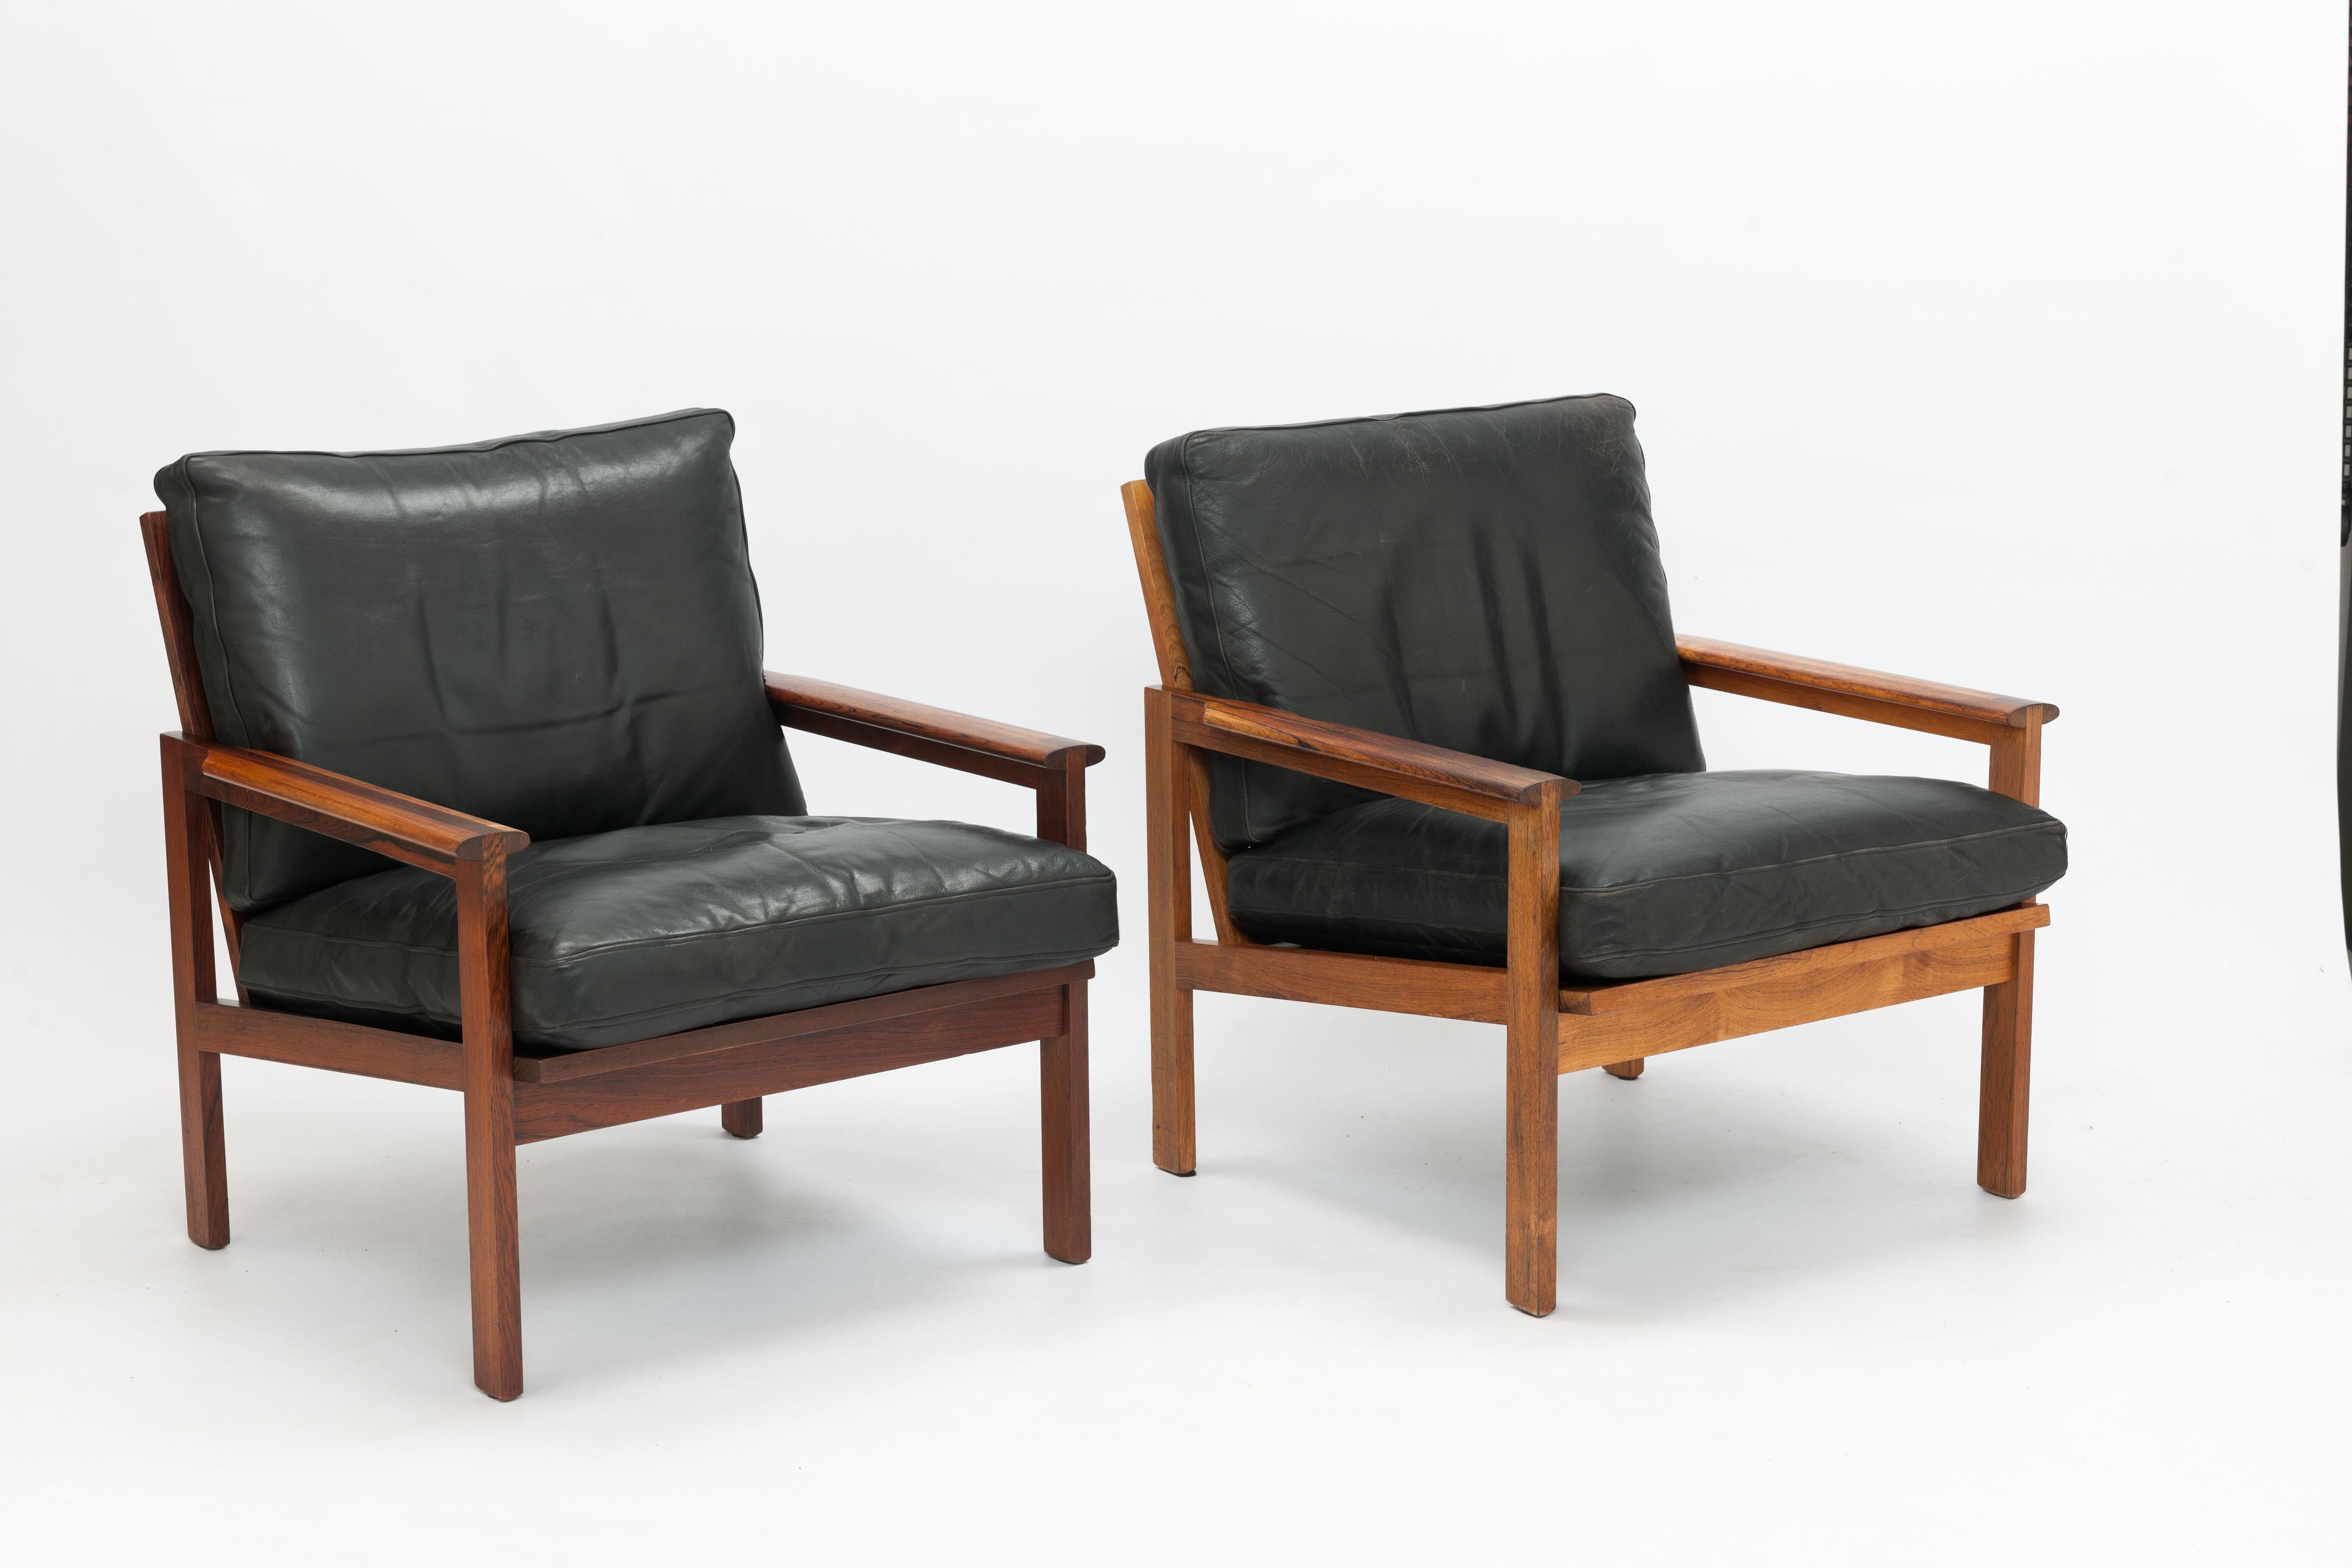 Rosewood & Black Leather Capella Arm Chair by Illum Wikkelsø, Pair Available 6